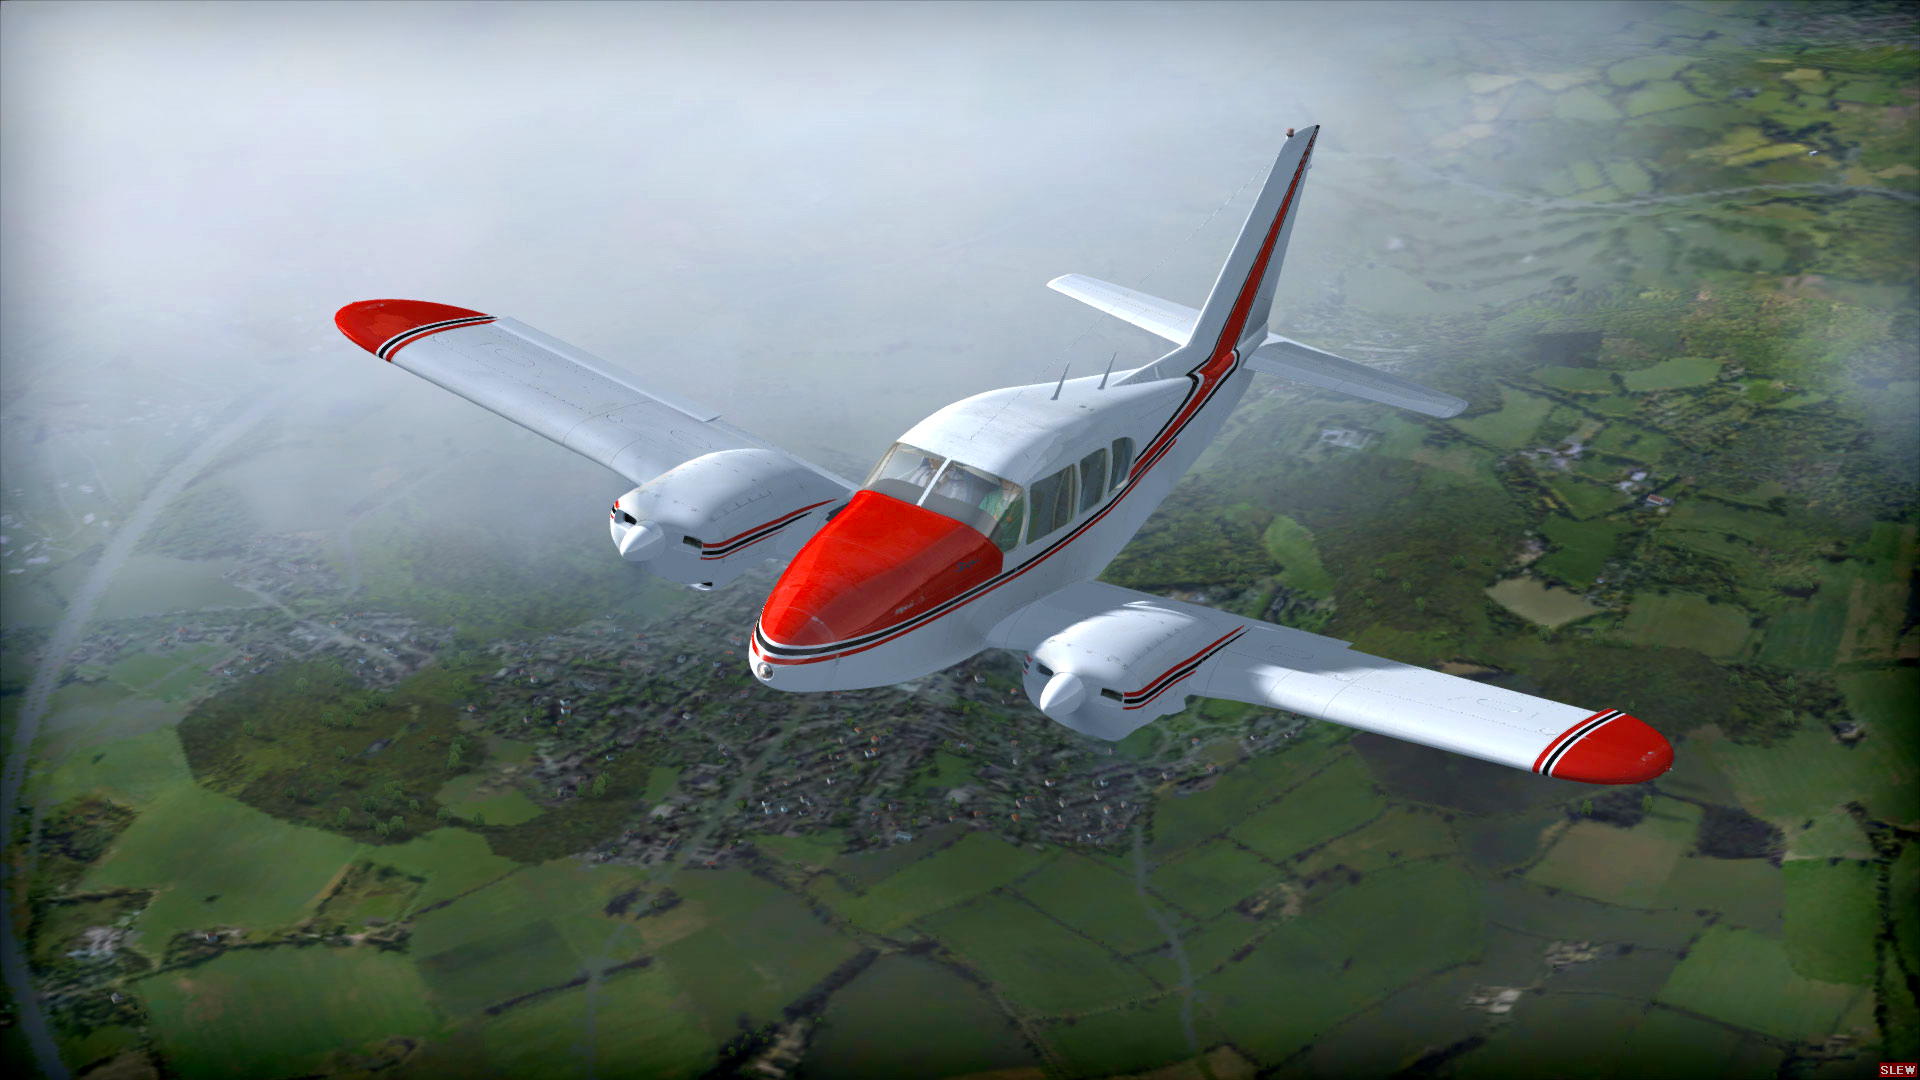 Buy FSX: Steam Edition - Piper Aztec Add-On from the Humble Store